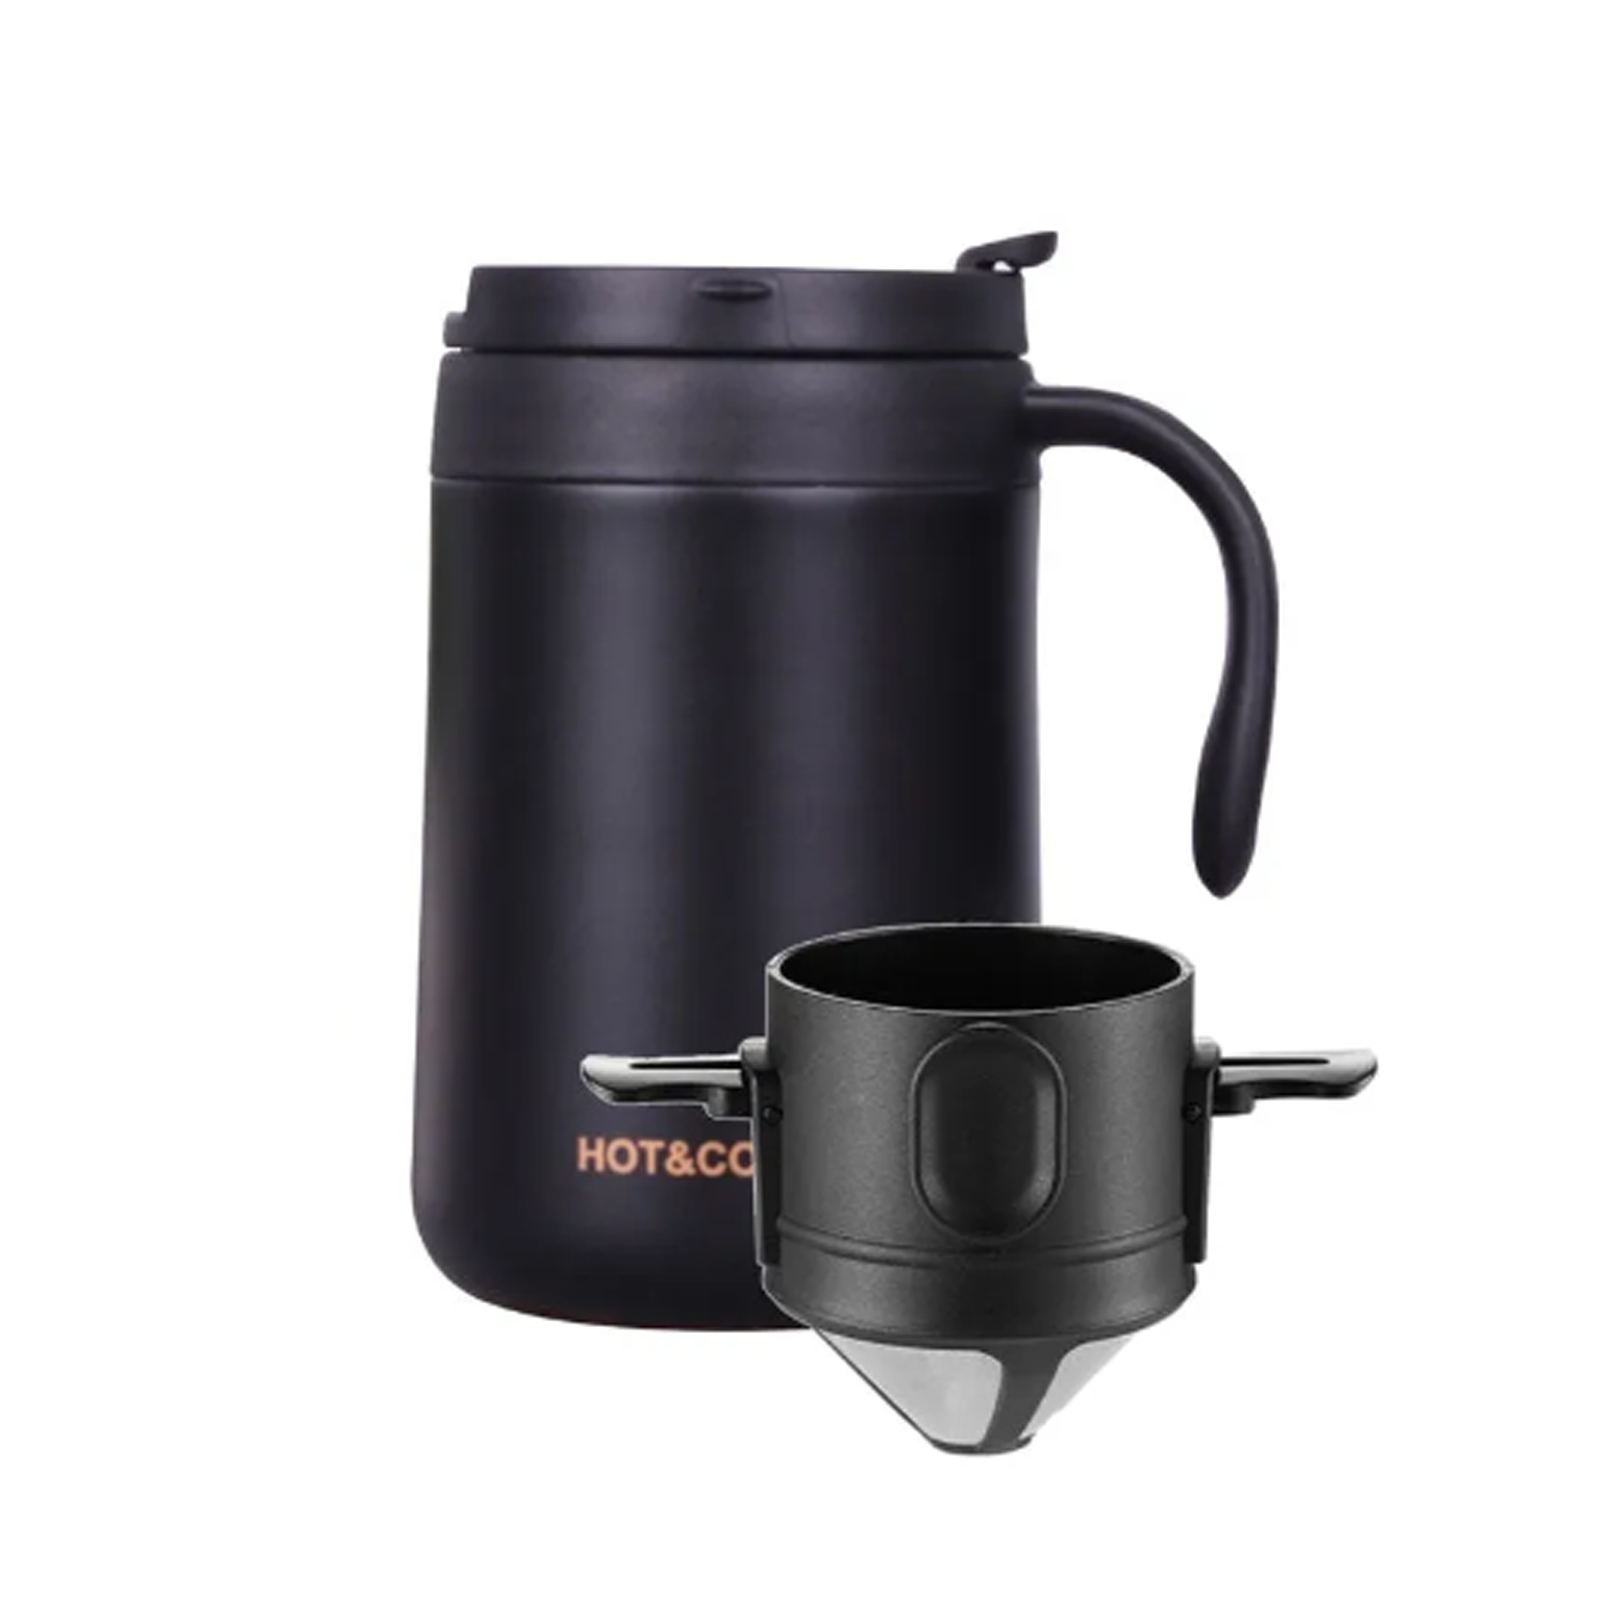 Giselle 304 Double Layer Drip Coffee Thermal Mug Cup with Portable Stainless Steel Coffee Filter Set 304不锈钢双层滴漏咖啡保温杯+便携式不锈钢咖啡过滤器套装 [DCC0001]